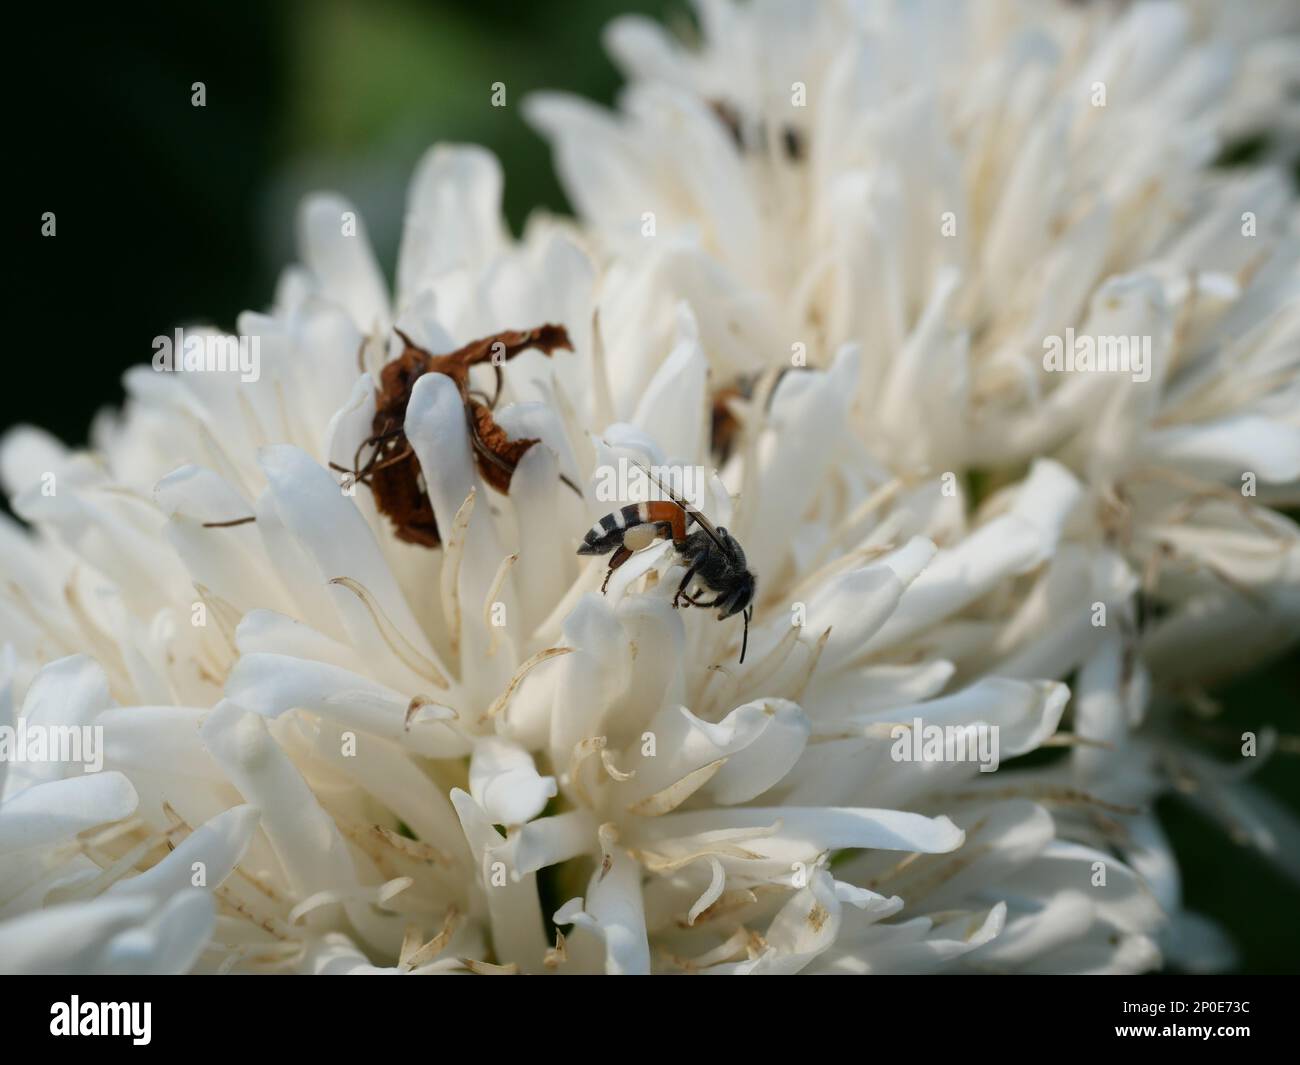 Group of Red dwarf Honey bee on Robusta coffee blossom on tree plant with green leaf with black color in background. Petals and white stamens Stock Photo